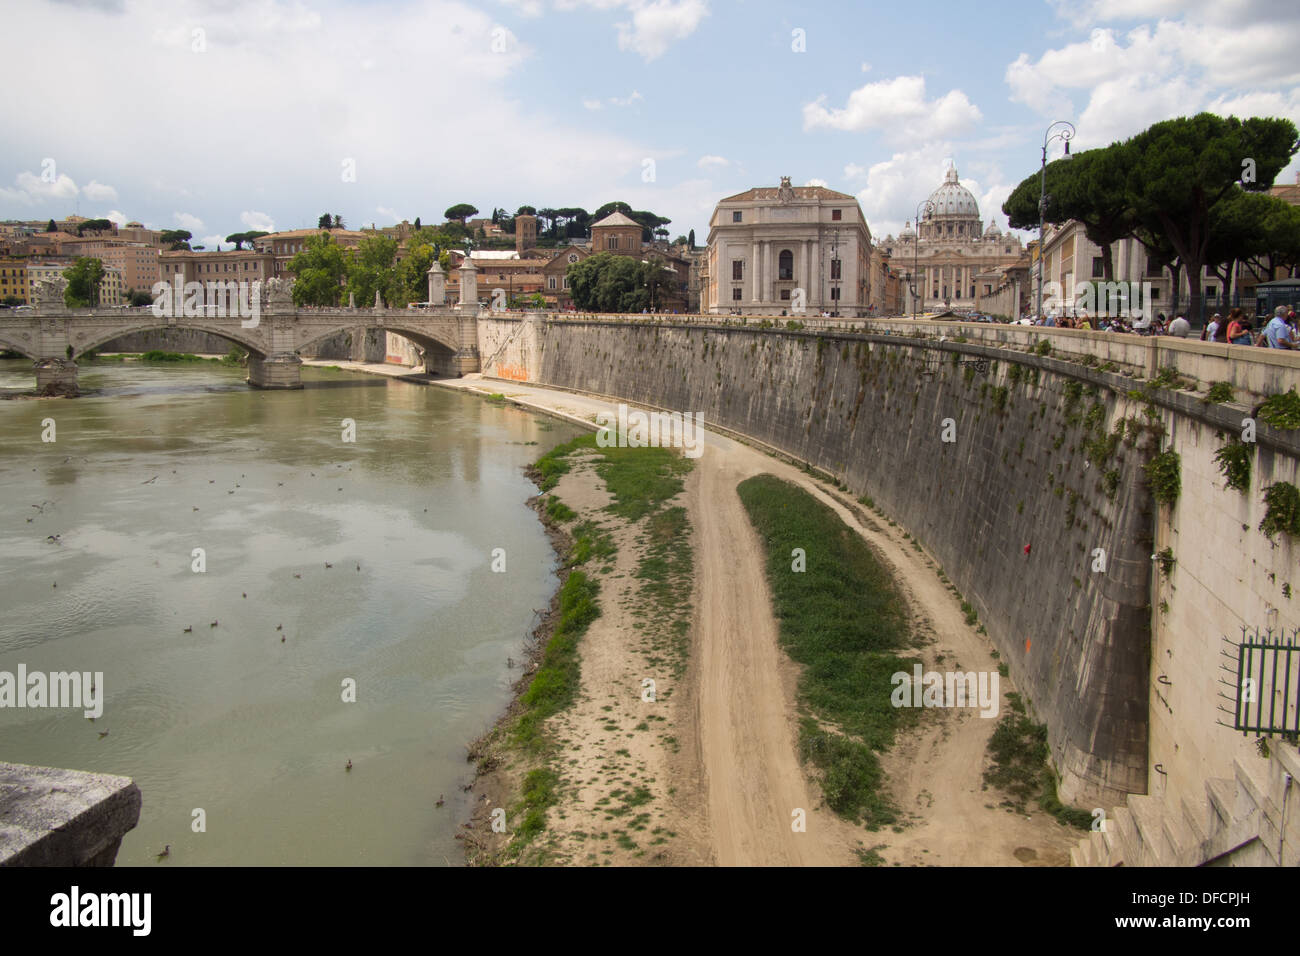 St Peters Basilica as viewed from the banks of the Tiber river, Rome, Lazio region, Italy Stock Photo